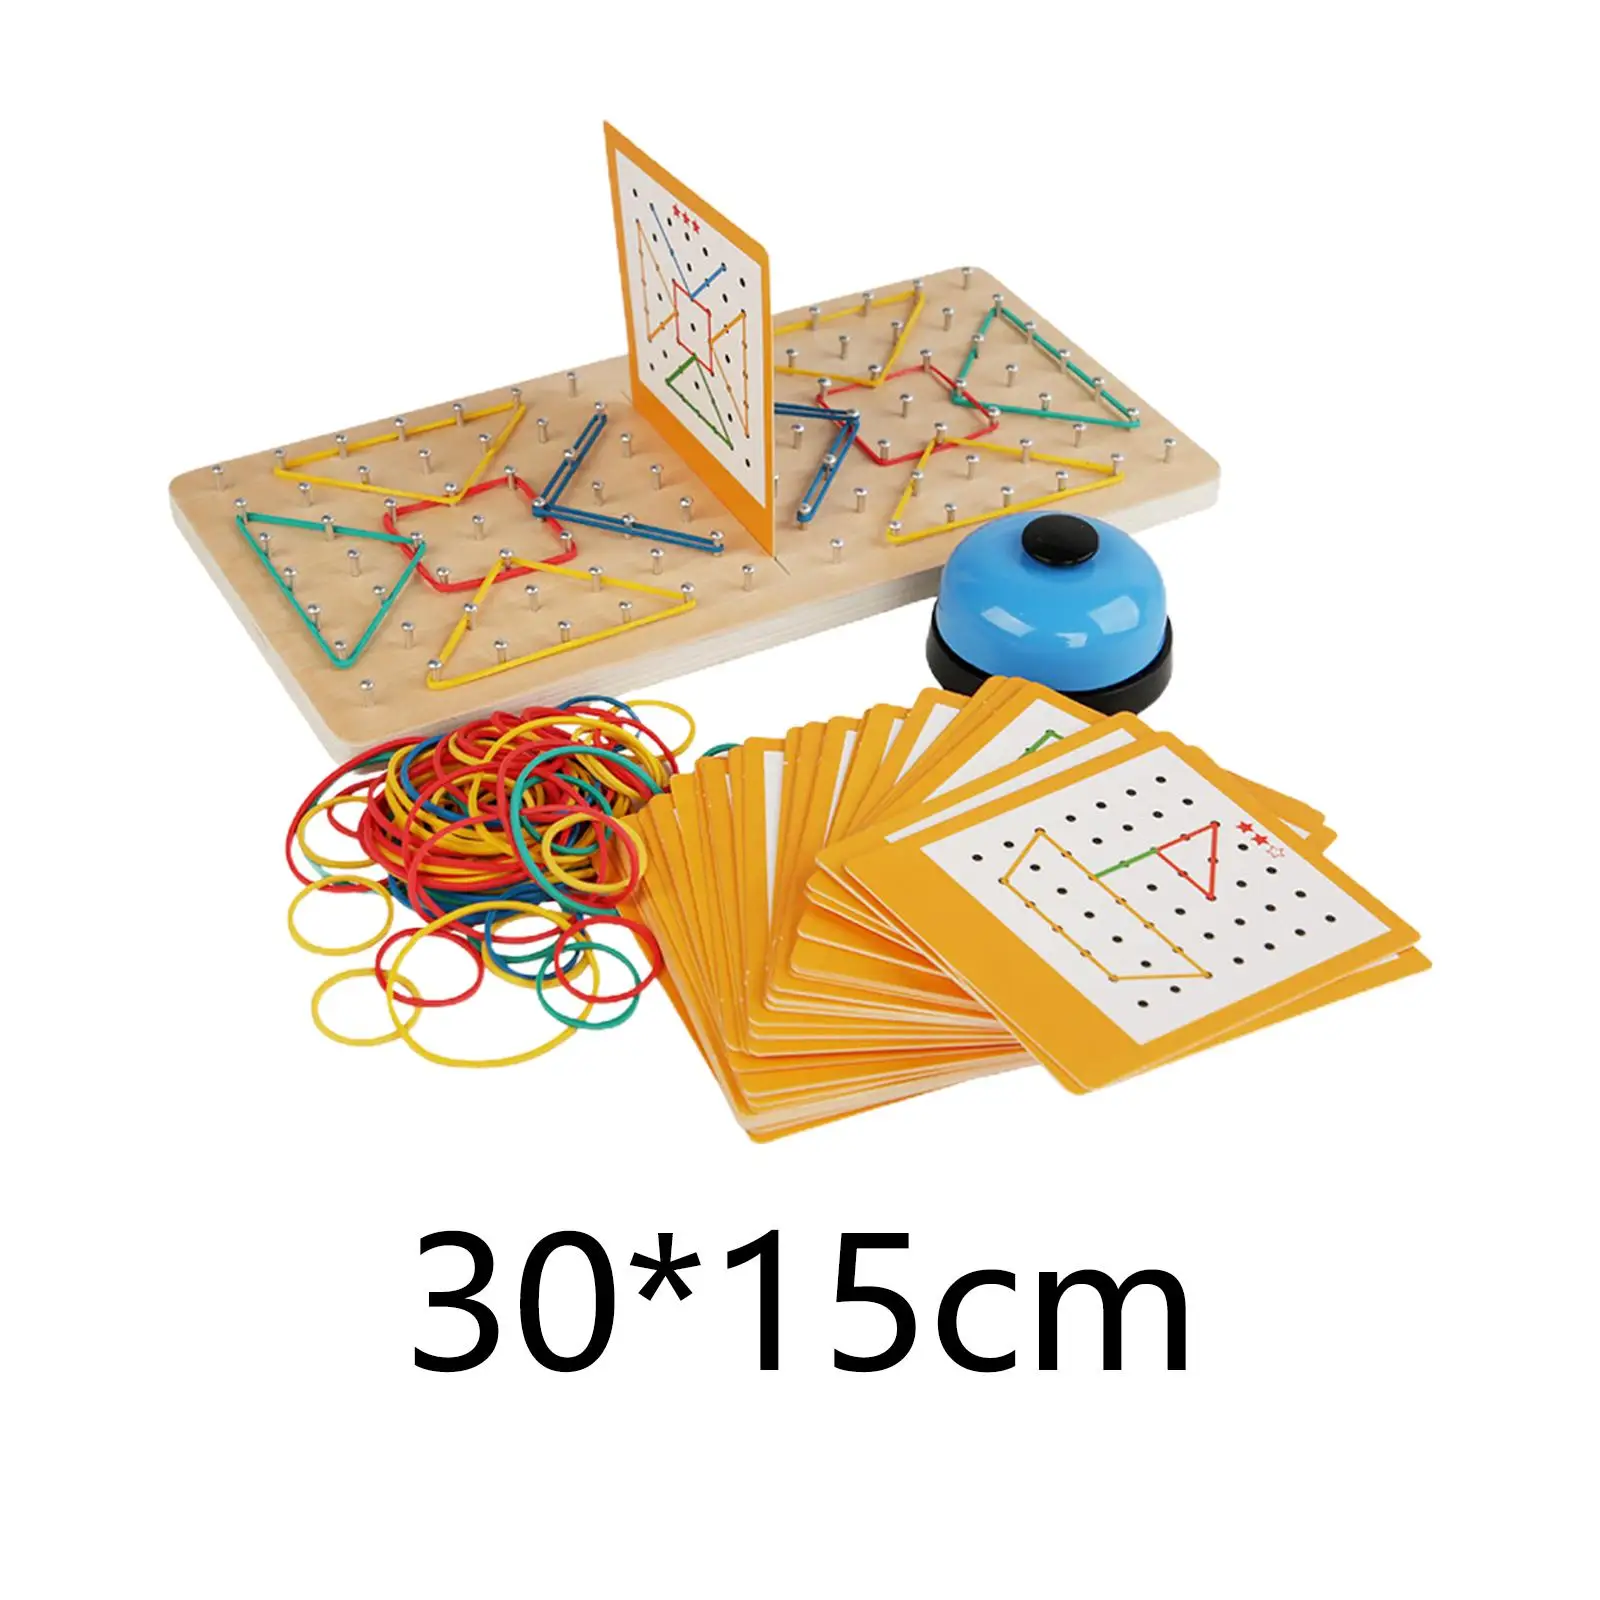 

Graphical Math Pattern Blocks Board Montessori Early Learning Education Toy Graphical Educational Mathematics Material for Kids